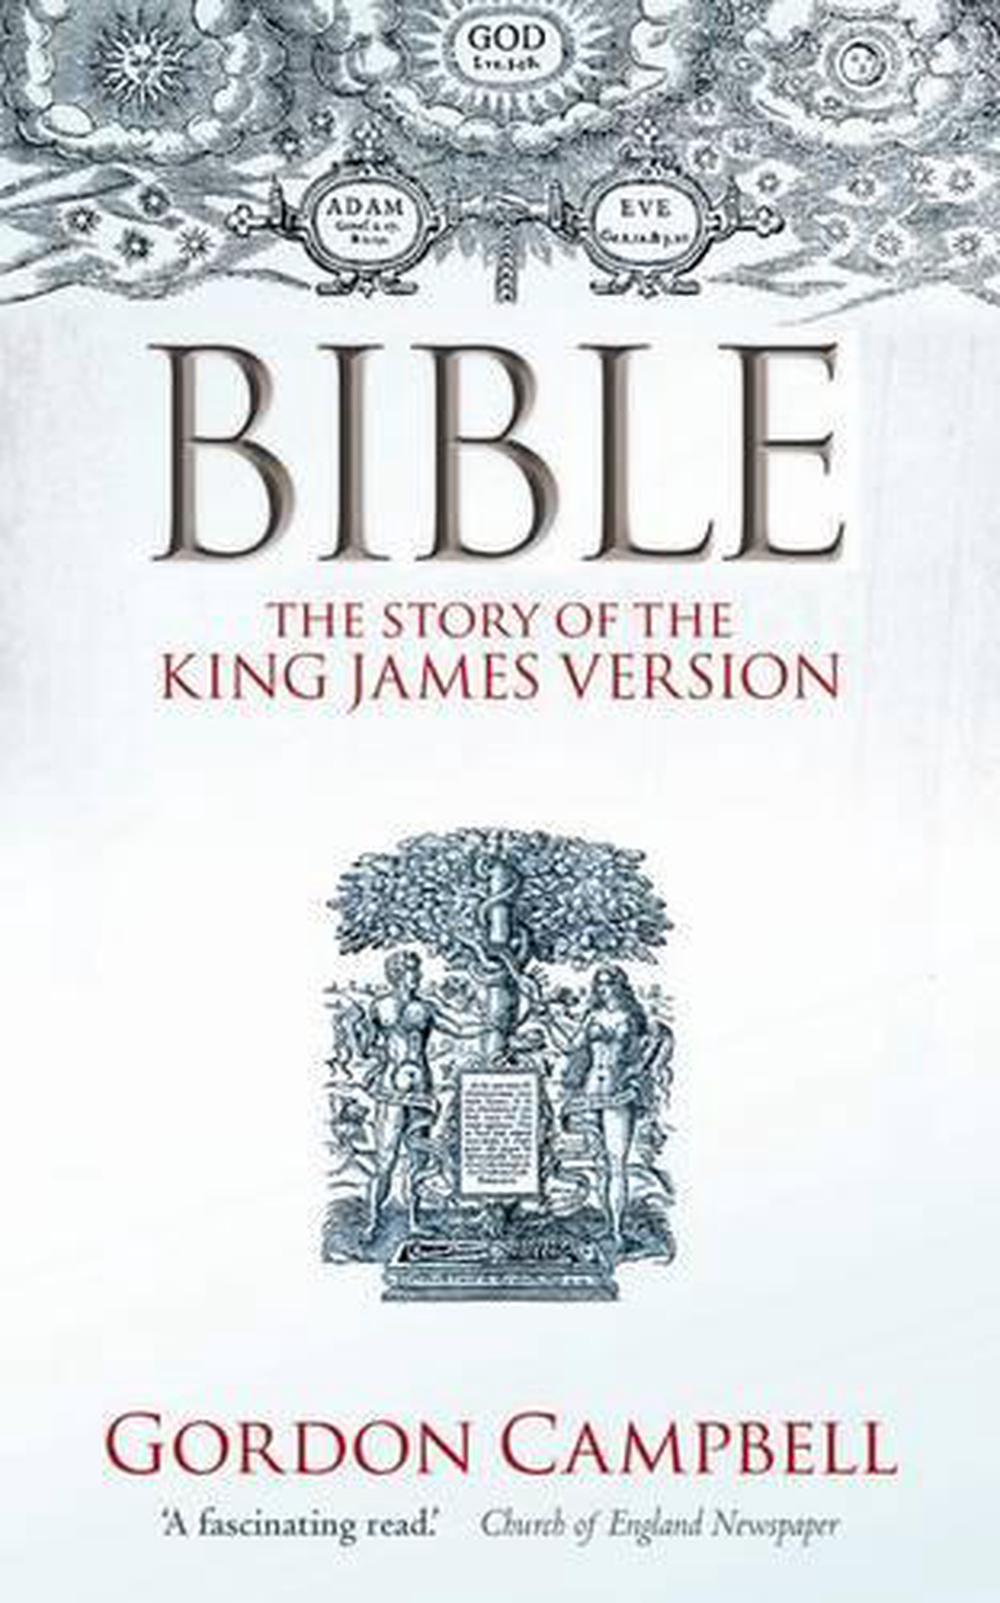 Bible by Gordon Campbell, Paperback, 9780199693016 | Buy online at The Nile